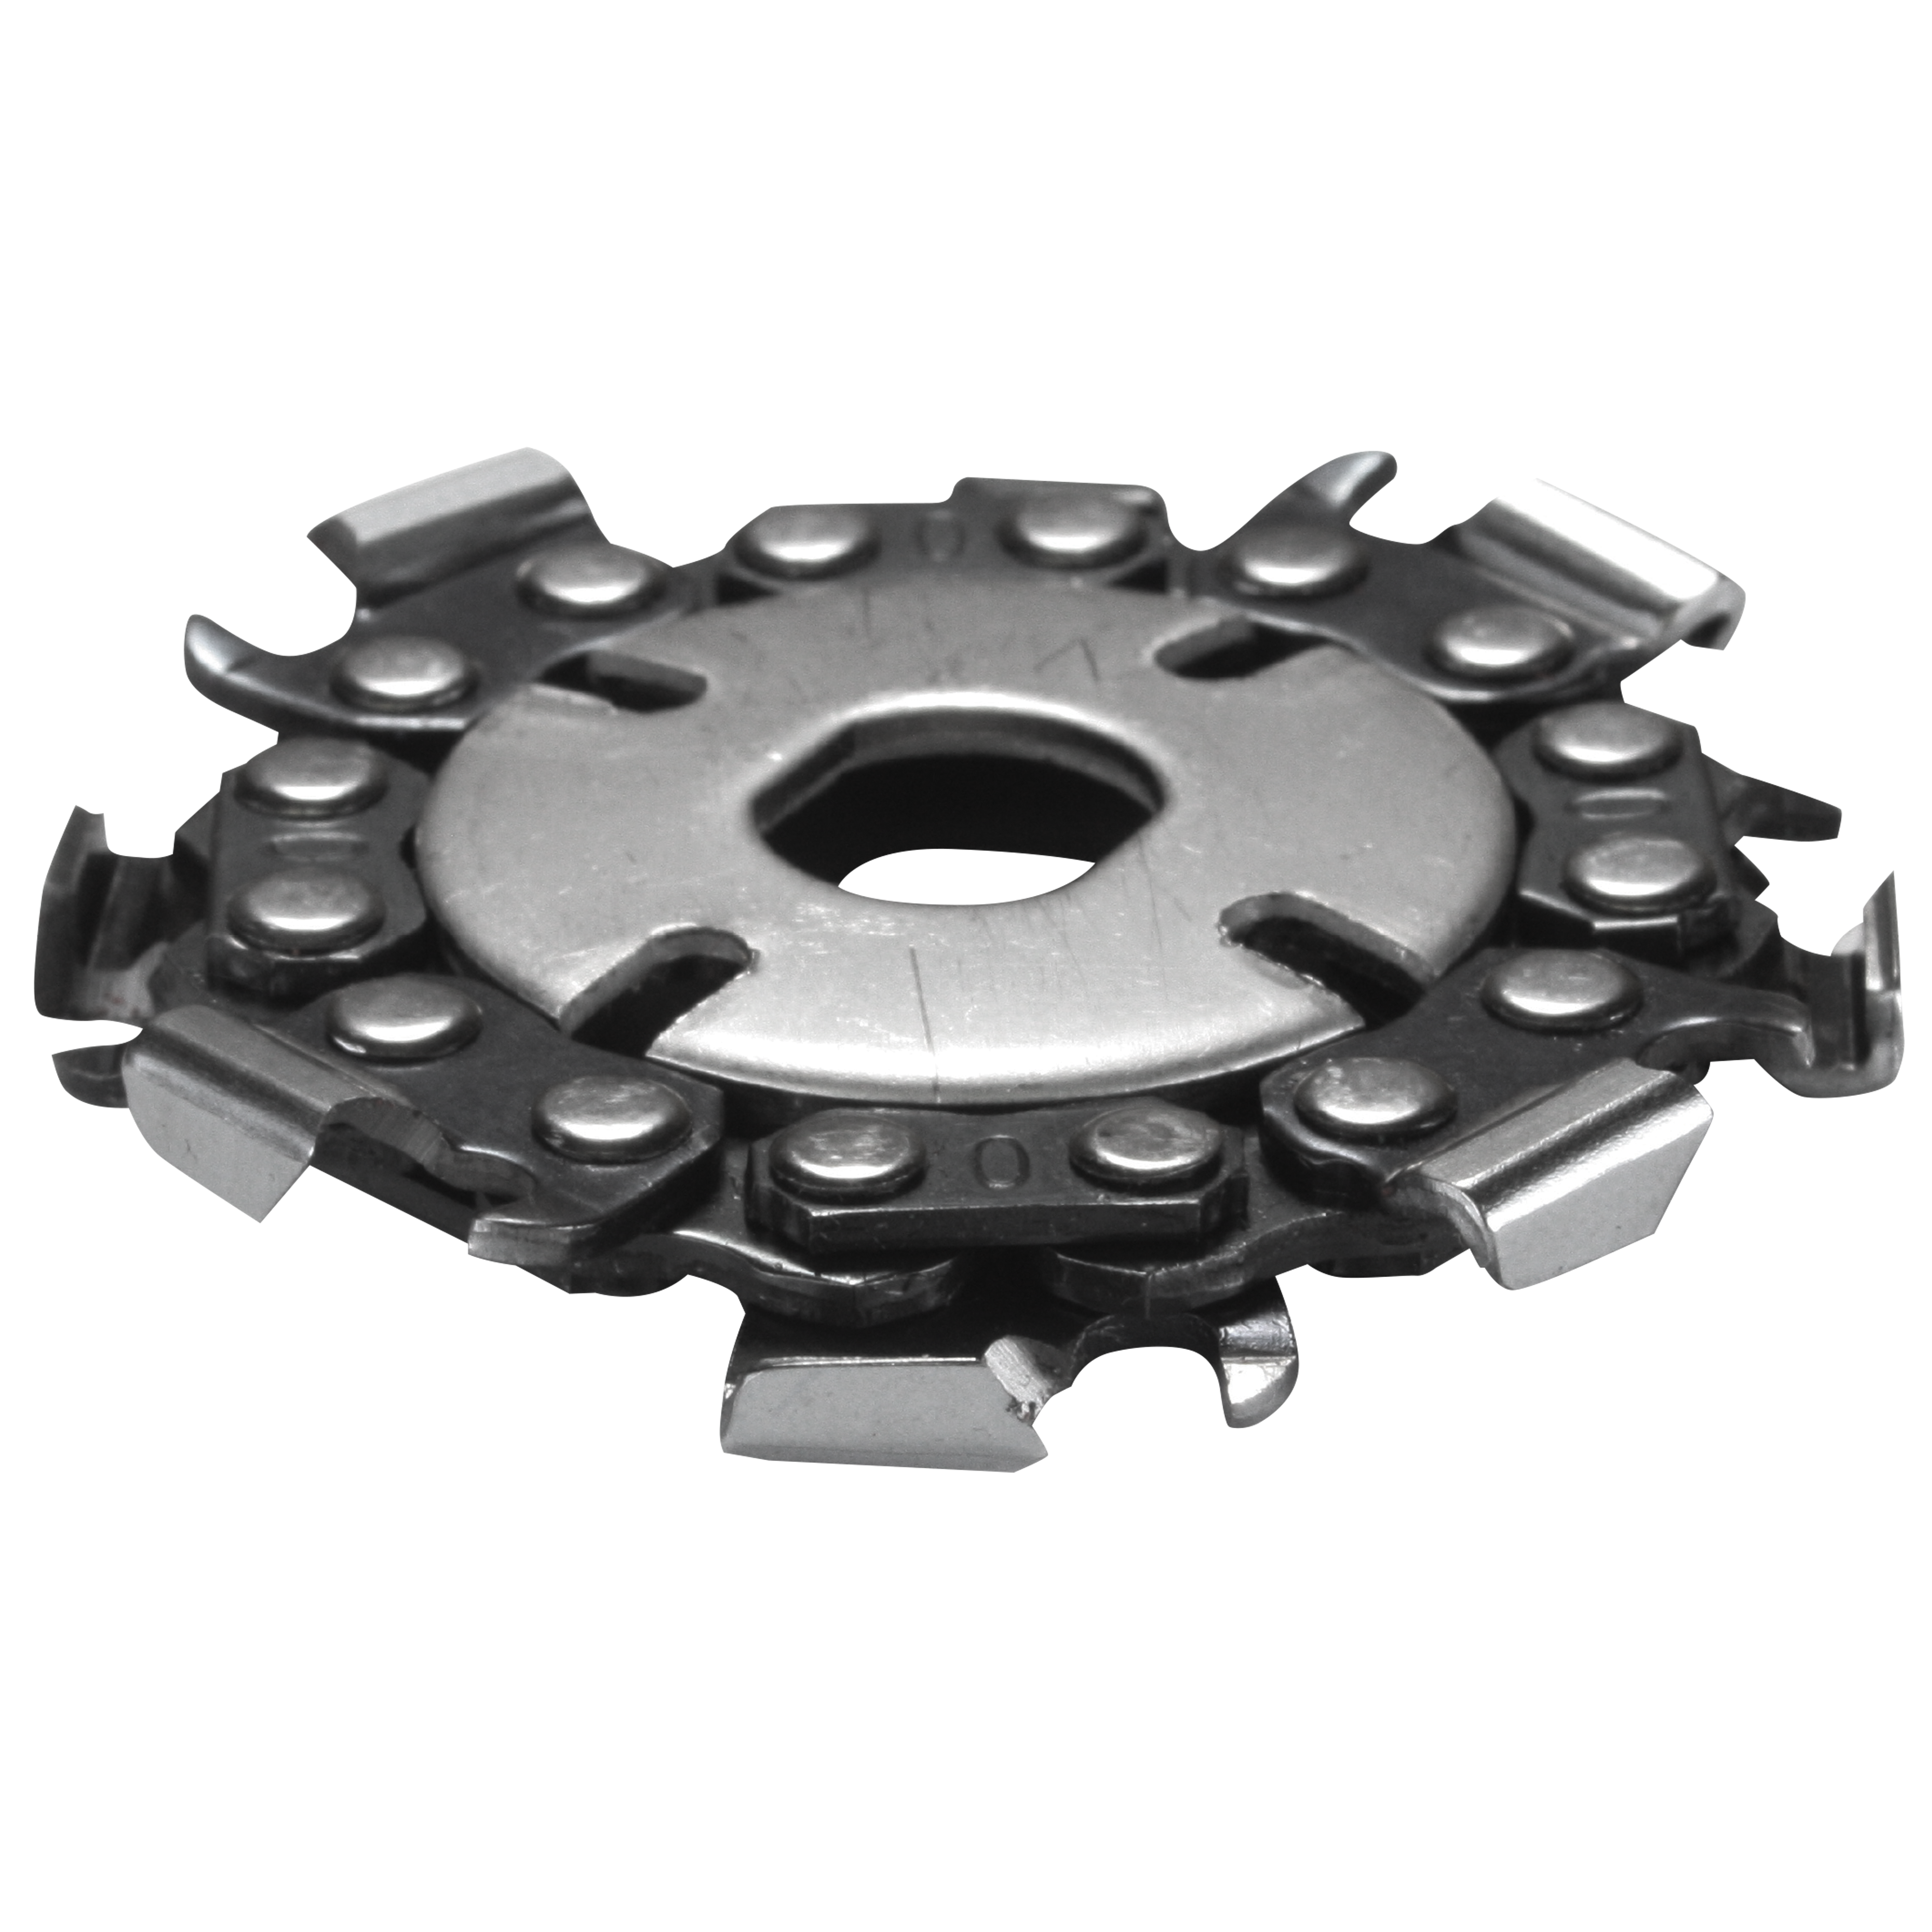 8 - Tooth Cdisc with Attachment Discs